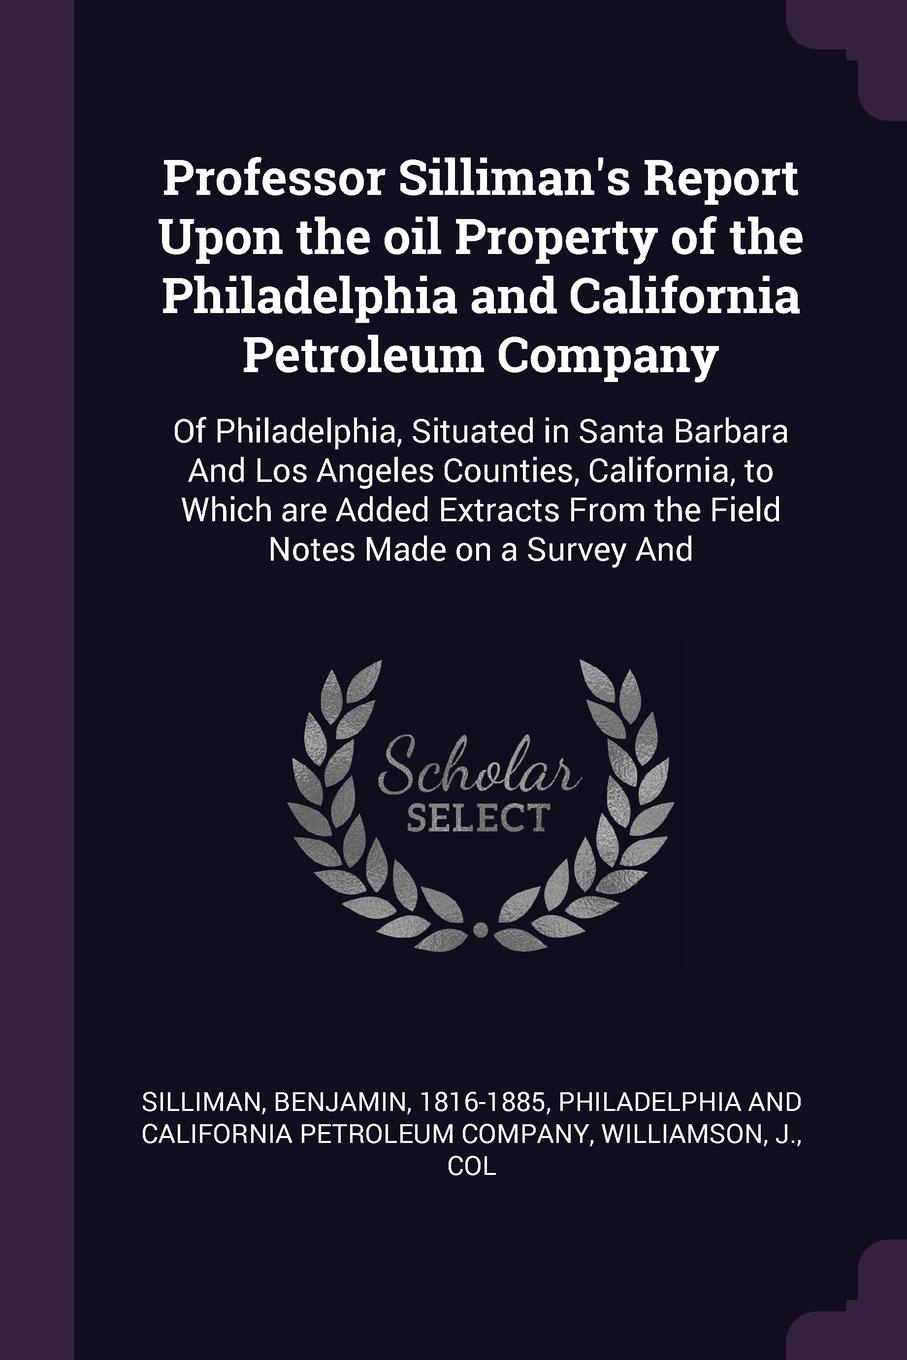 Professor Silliman`s Report Upon the oil Property of the Philadelphia and California Petroleum Company. Of Philadelphia, Situated in Santa Barbara And Los Angeles Counties, California, to Which are Added Extracts From the Field Notes Made on a Sur...